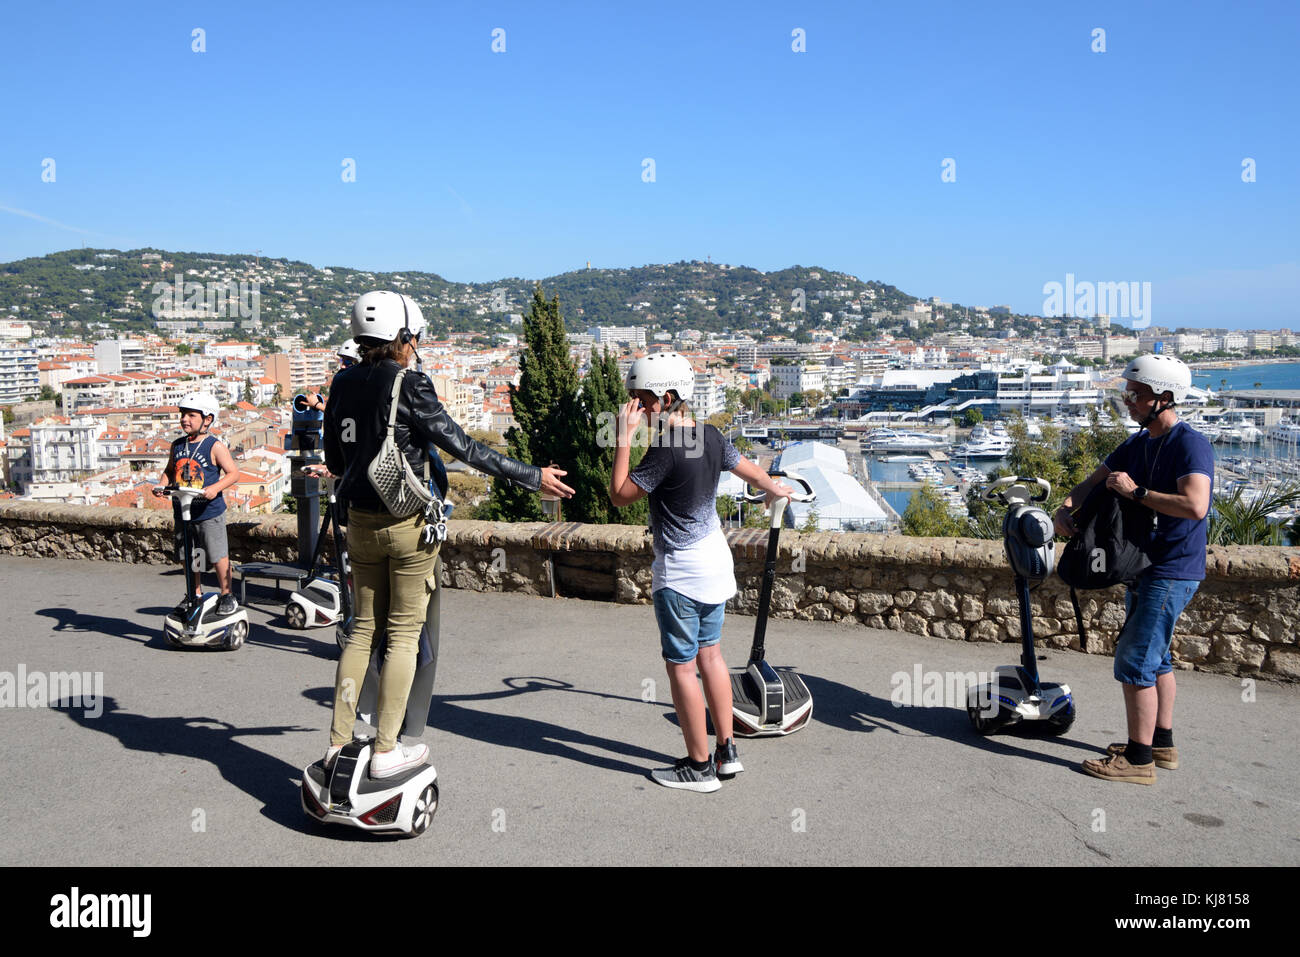 Family Tourists on Segway Scooter Tour in Suquet Old Town of Cannes overlooking La Croisette Waterfront or Seafront, Cannes, French Riviera, France Stock Photo